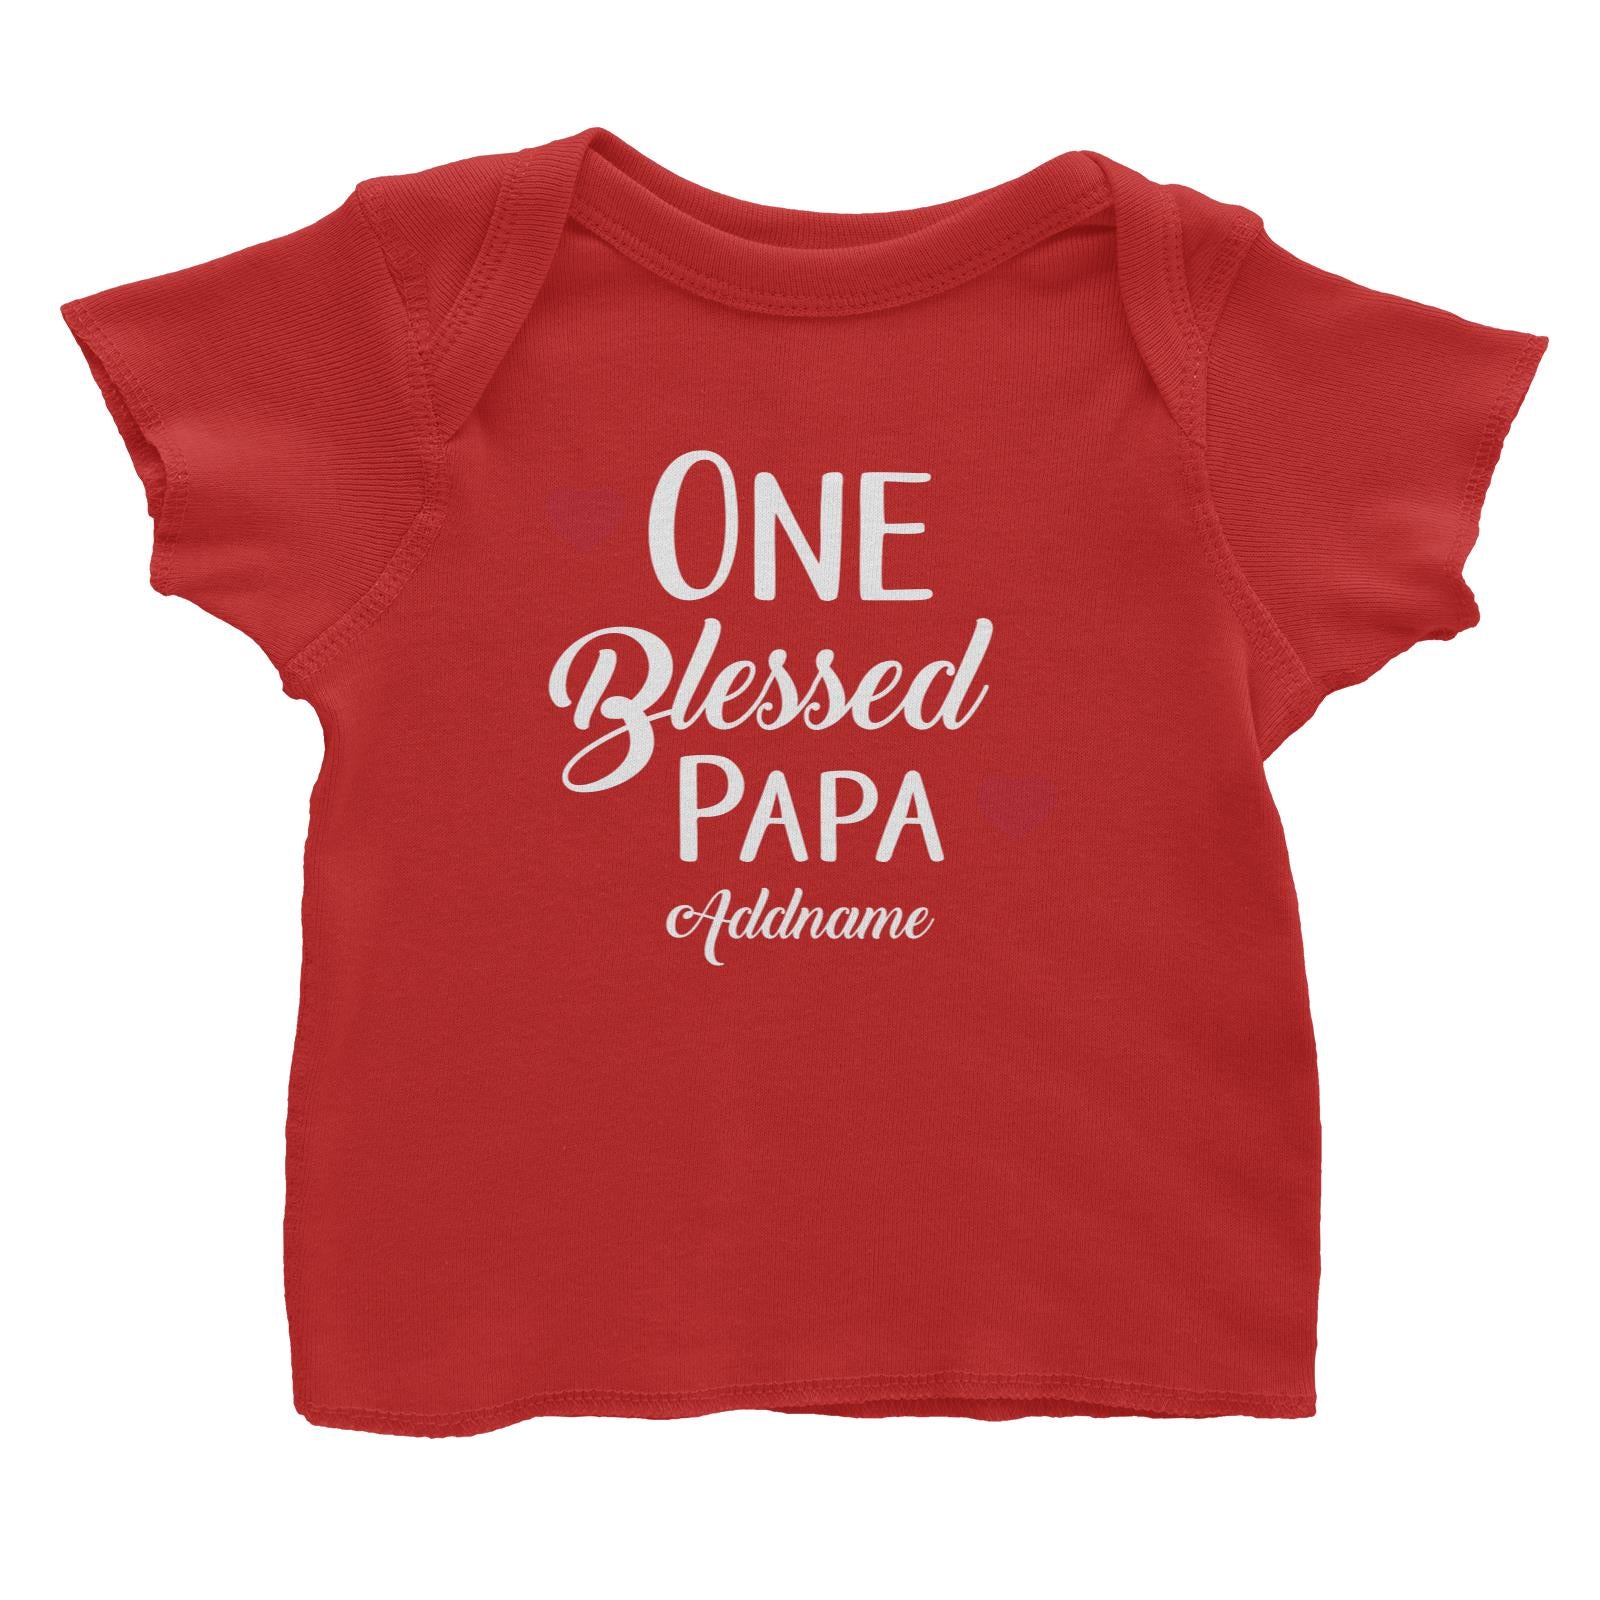 Christian Series One Blessed Papa Addname Baby T-Shirt